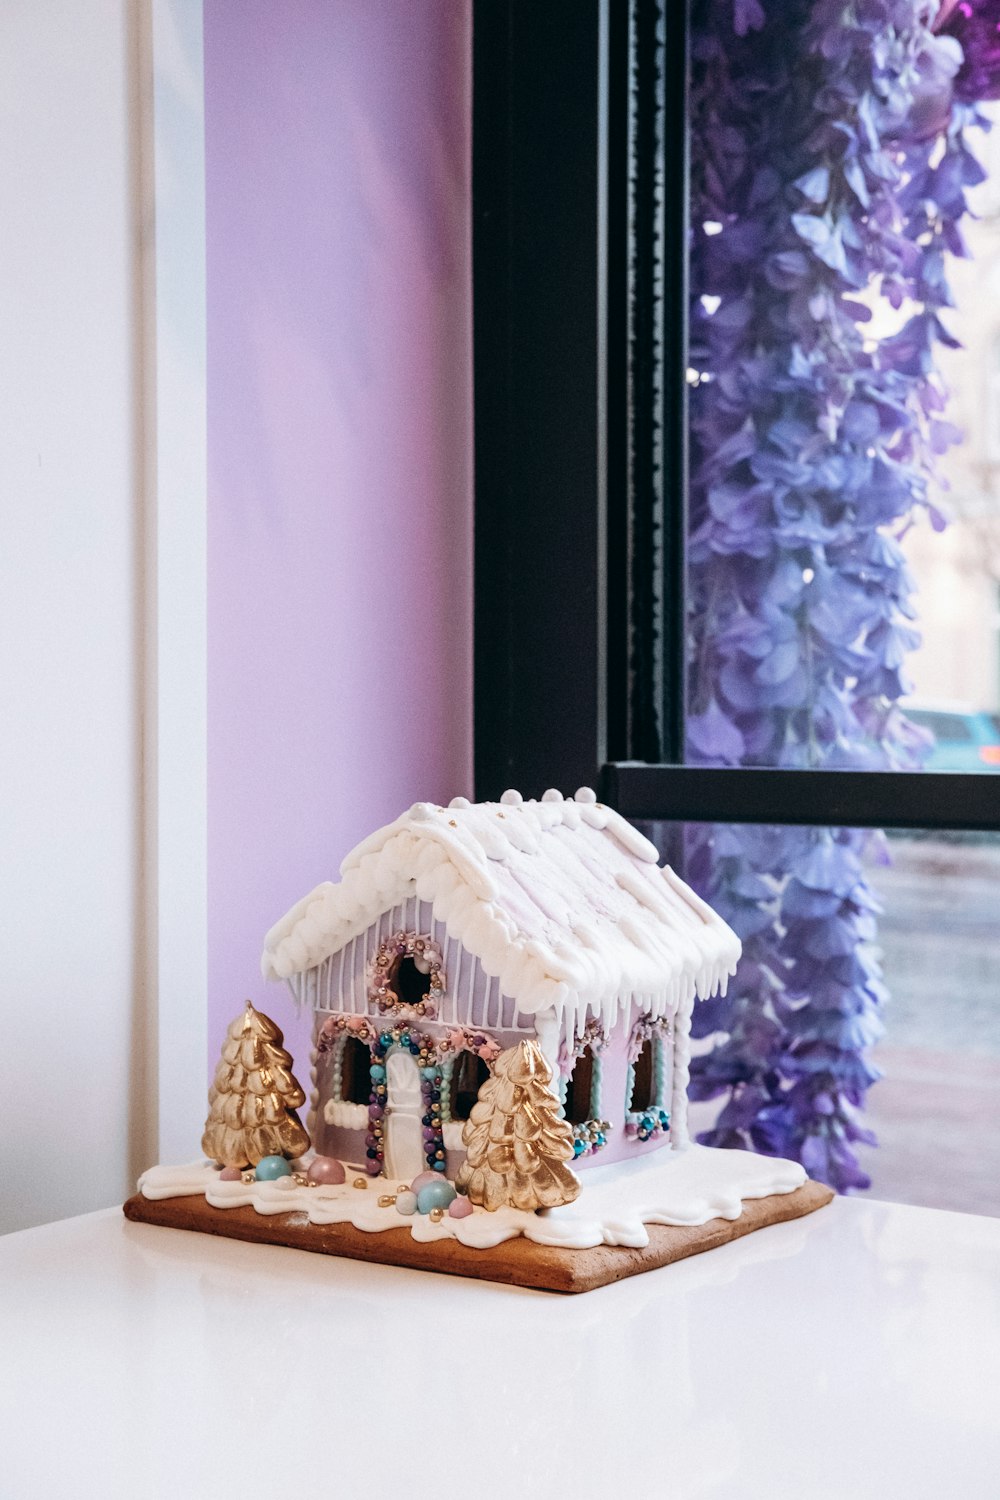 a gingerbread house on a table in front of a window